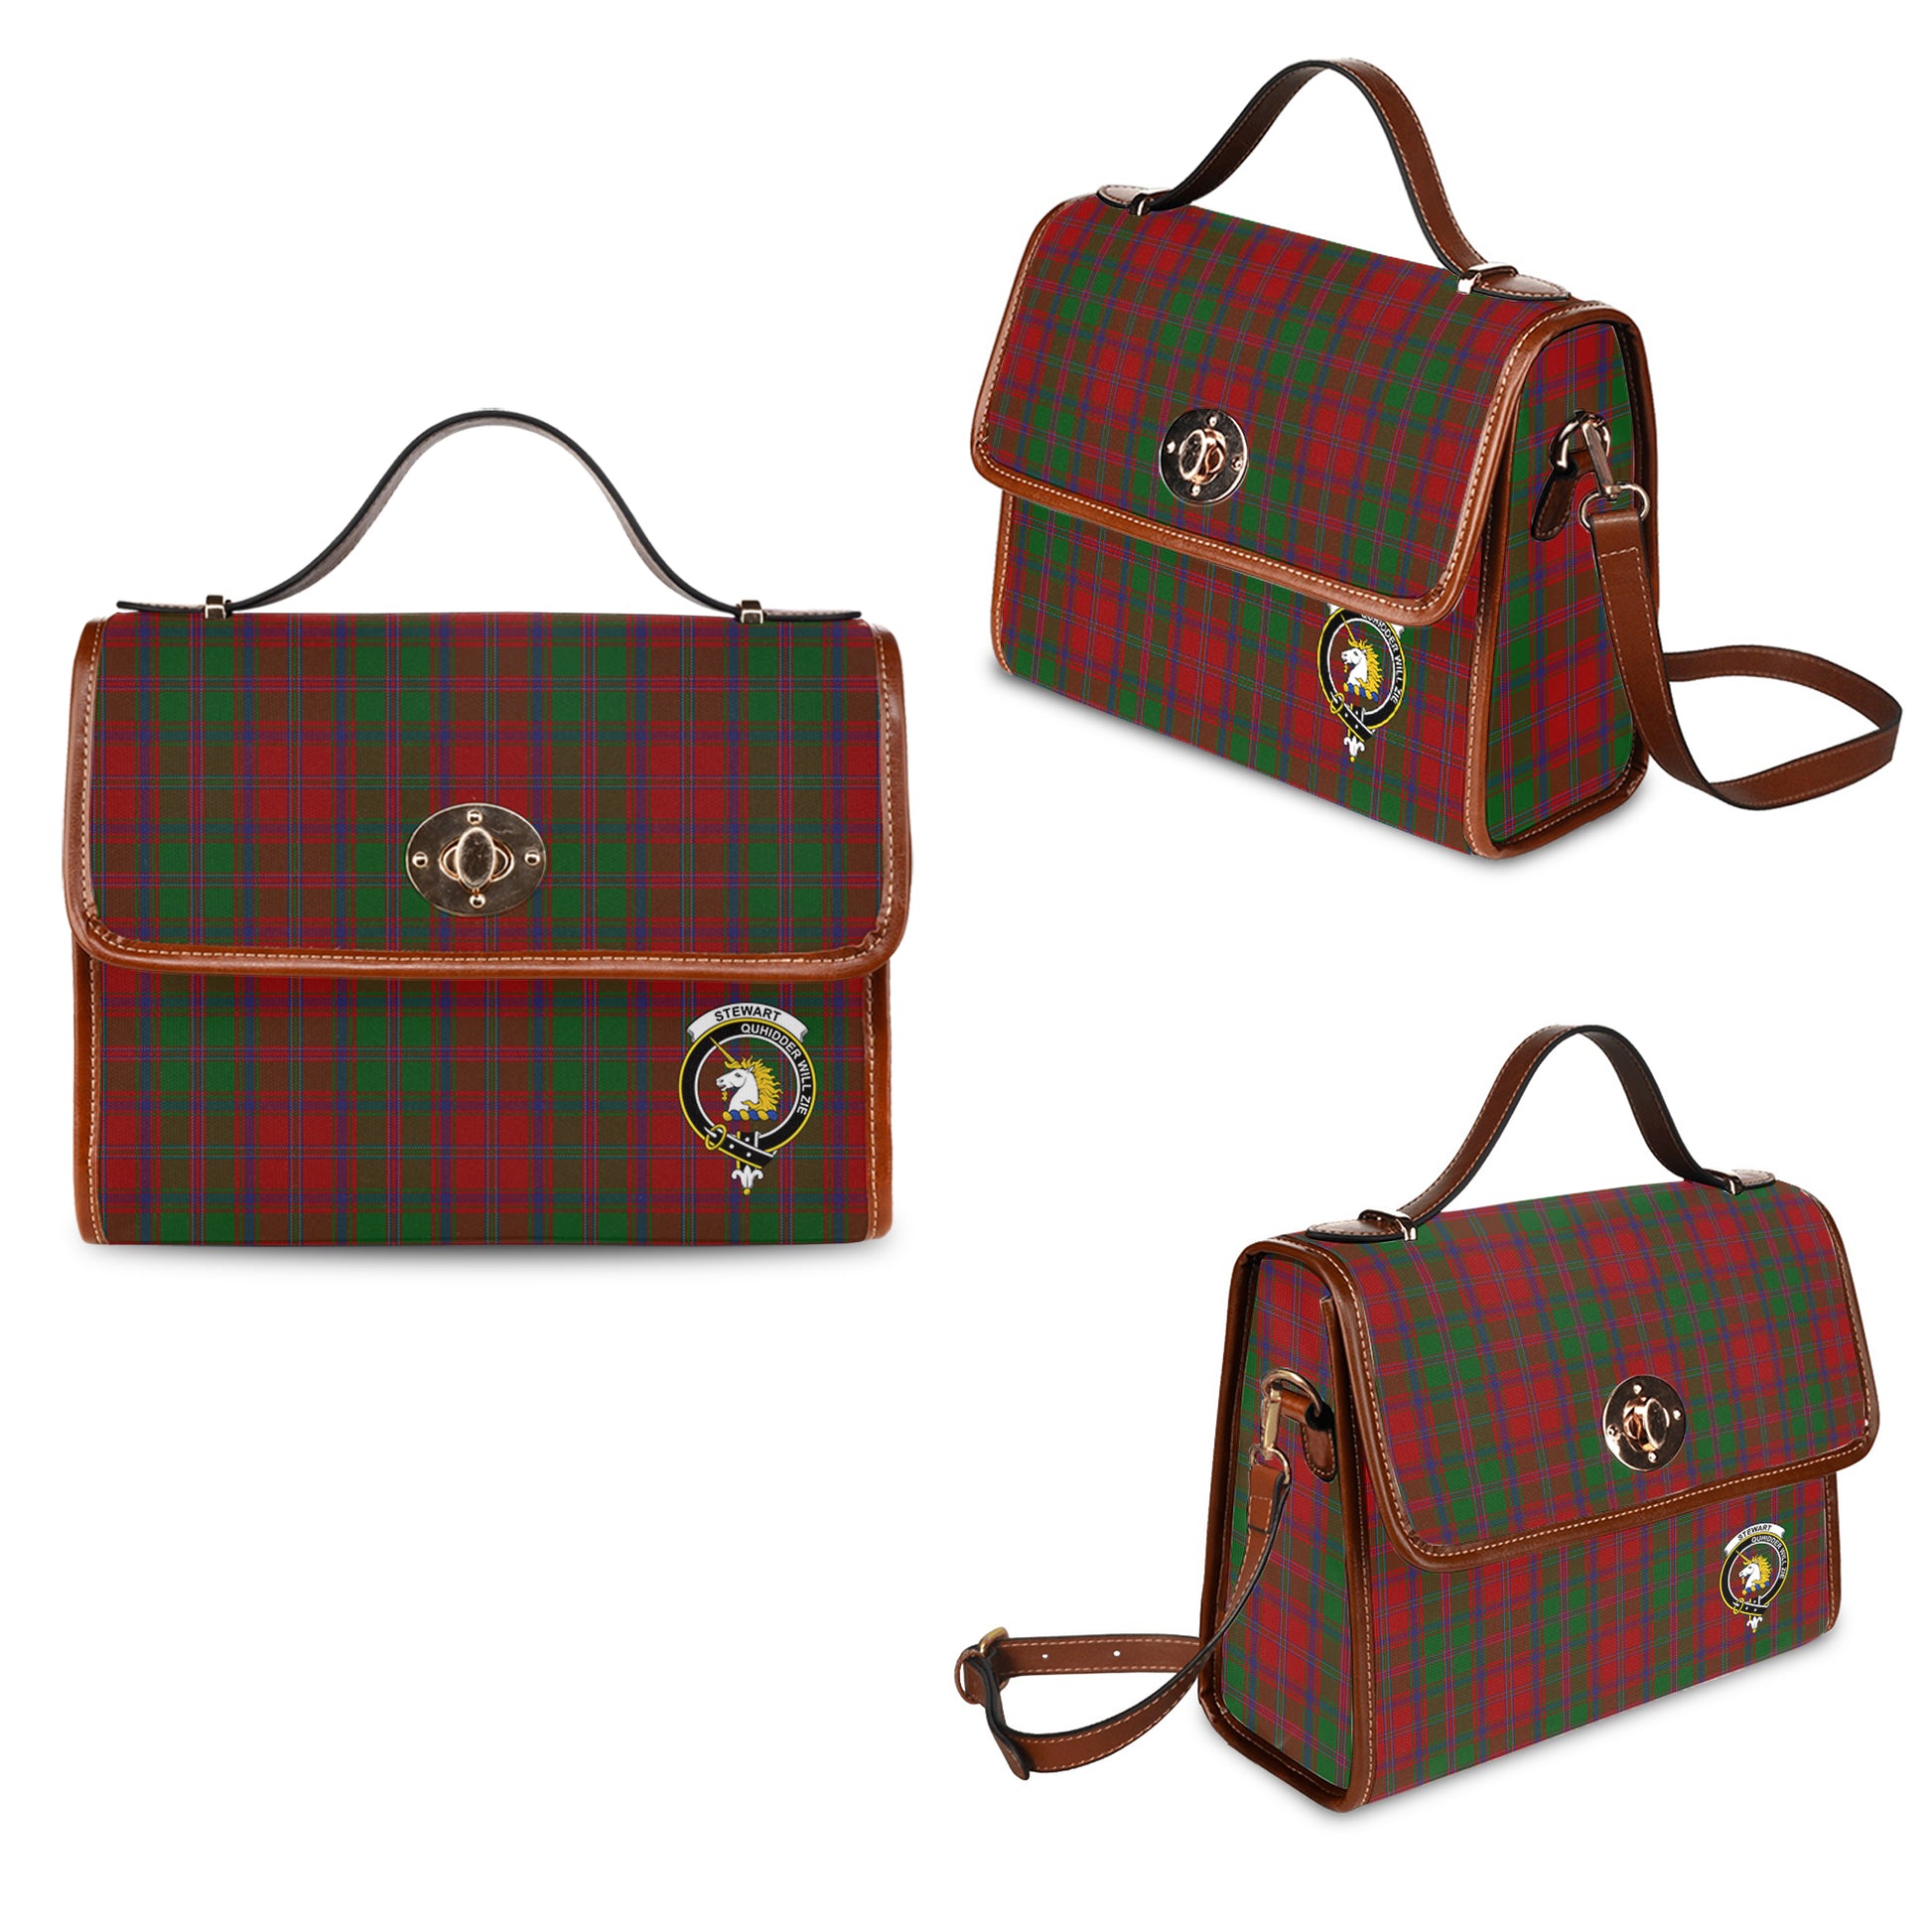 Stewart of Appin Tartan Leather Strap Waterproof Canvas Bag with Family Crest One Size 34cm * 42cm (13.4" x 16.5") - Tartanvibesclothing